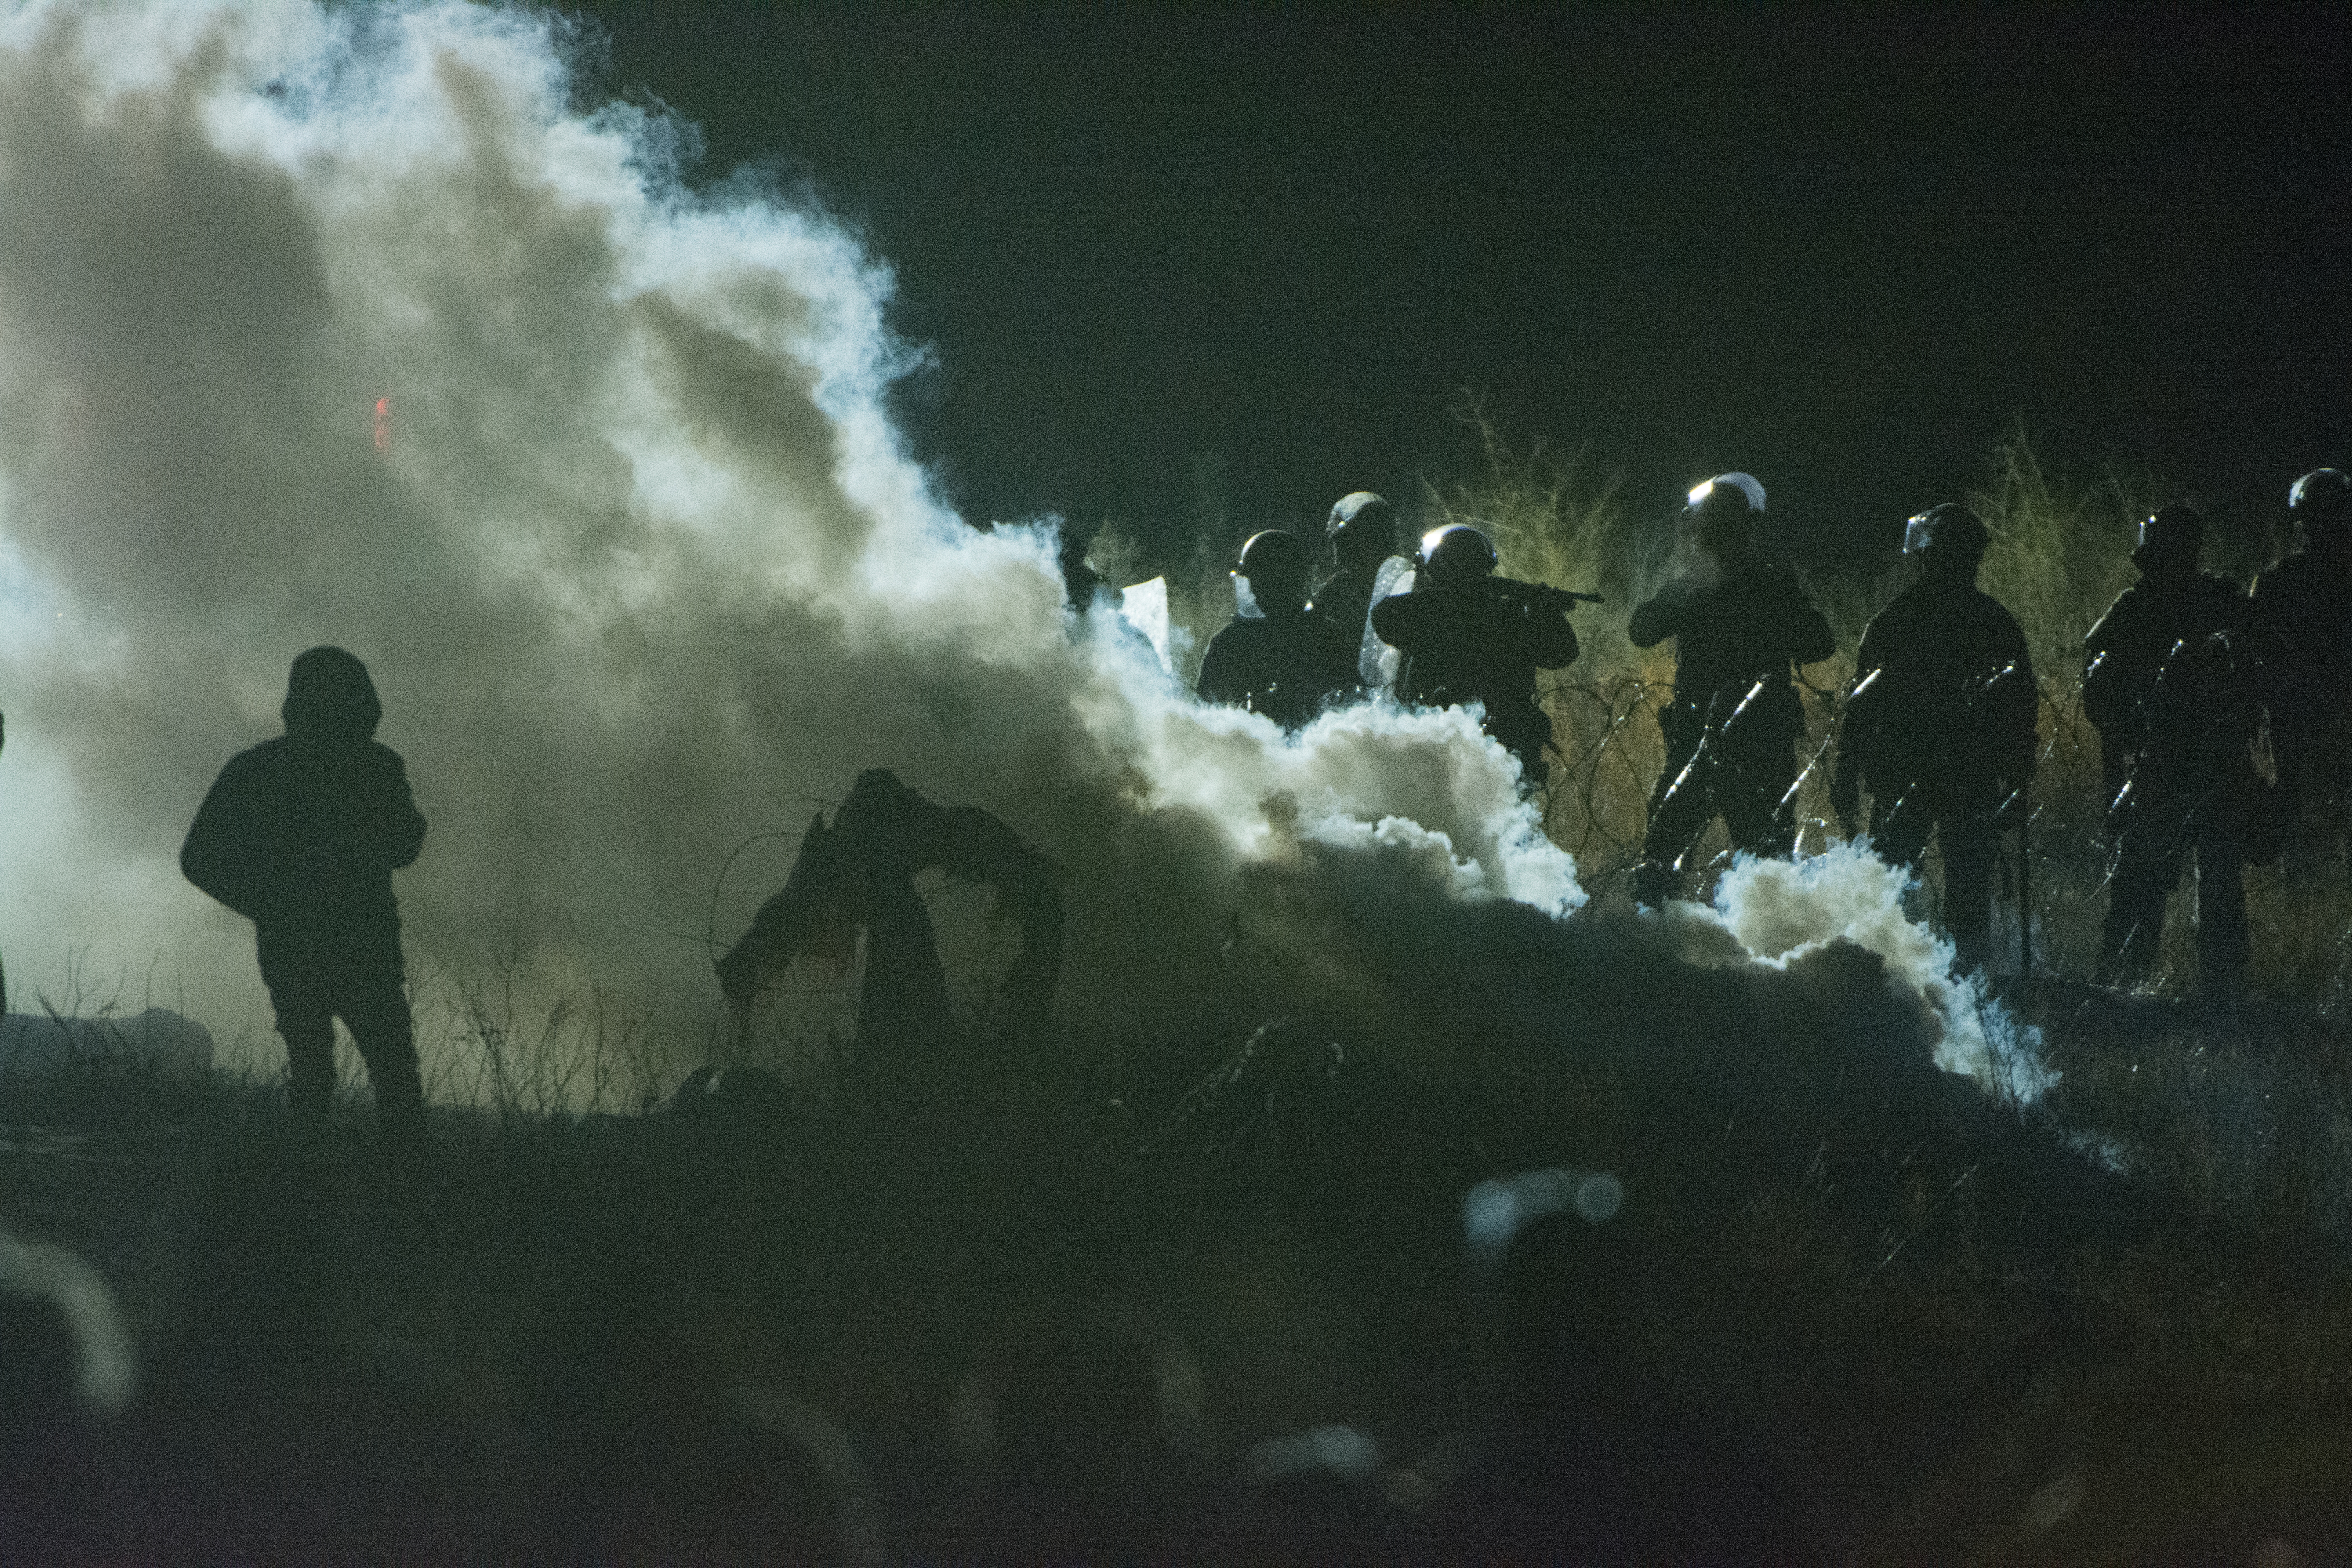 Police officers tear gas peaceful protesters at Standing Rock. (Ryan Turner)